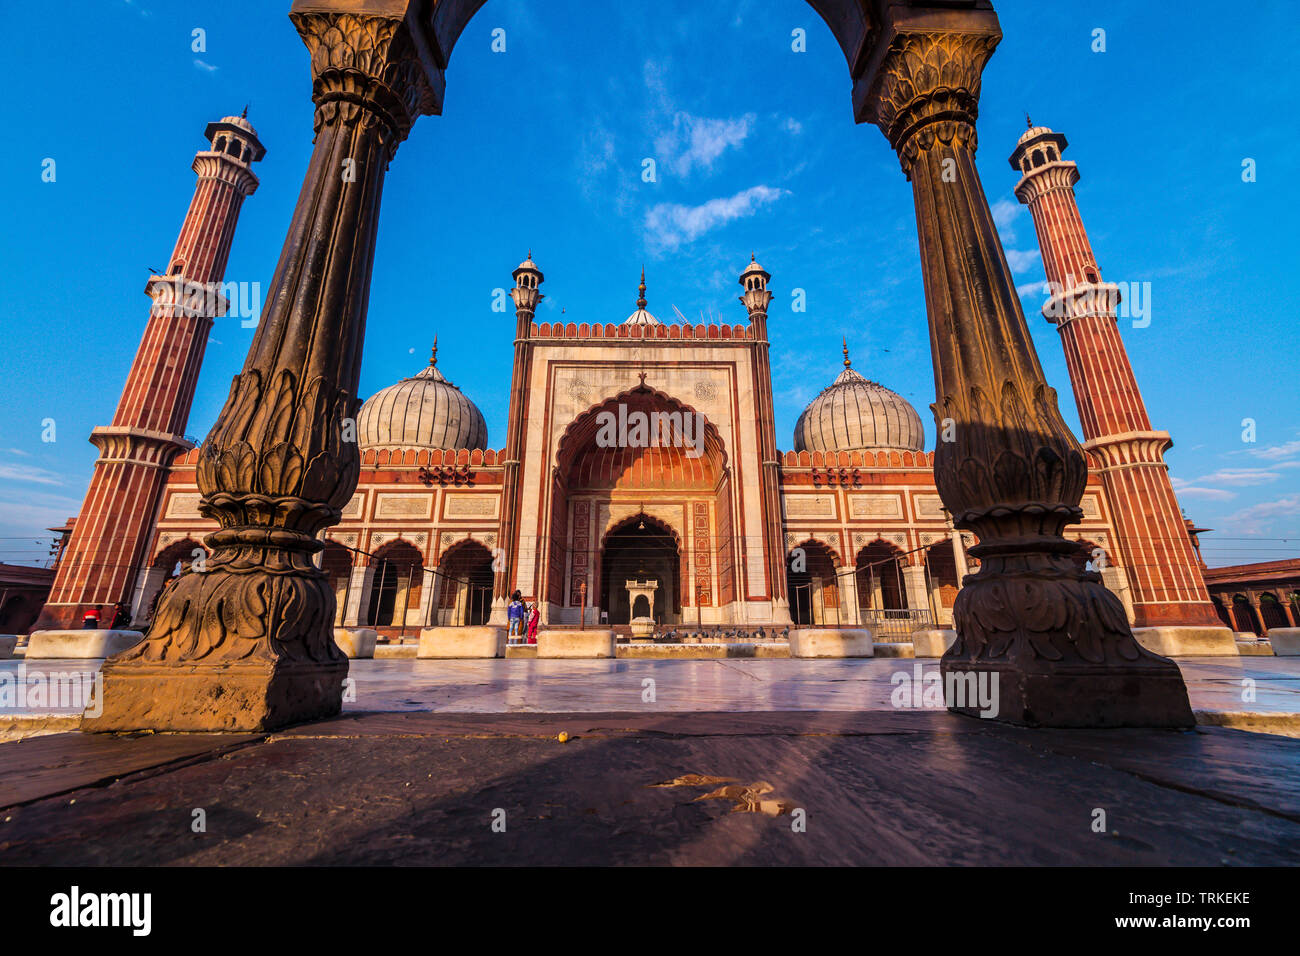 Day Trip to Jama Masjid, Old Delhi, India - The largest mosque of India Stock Photo